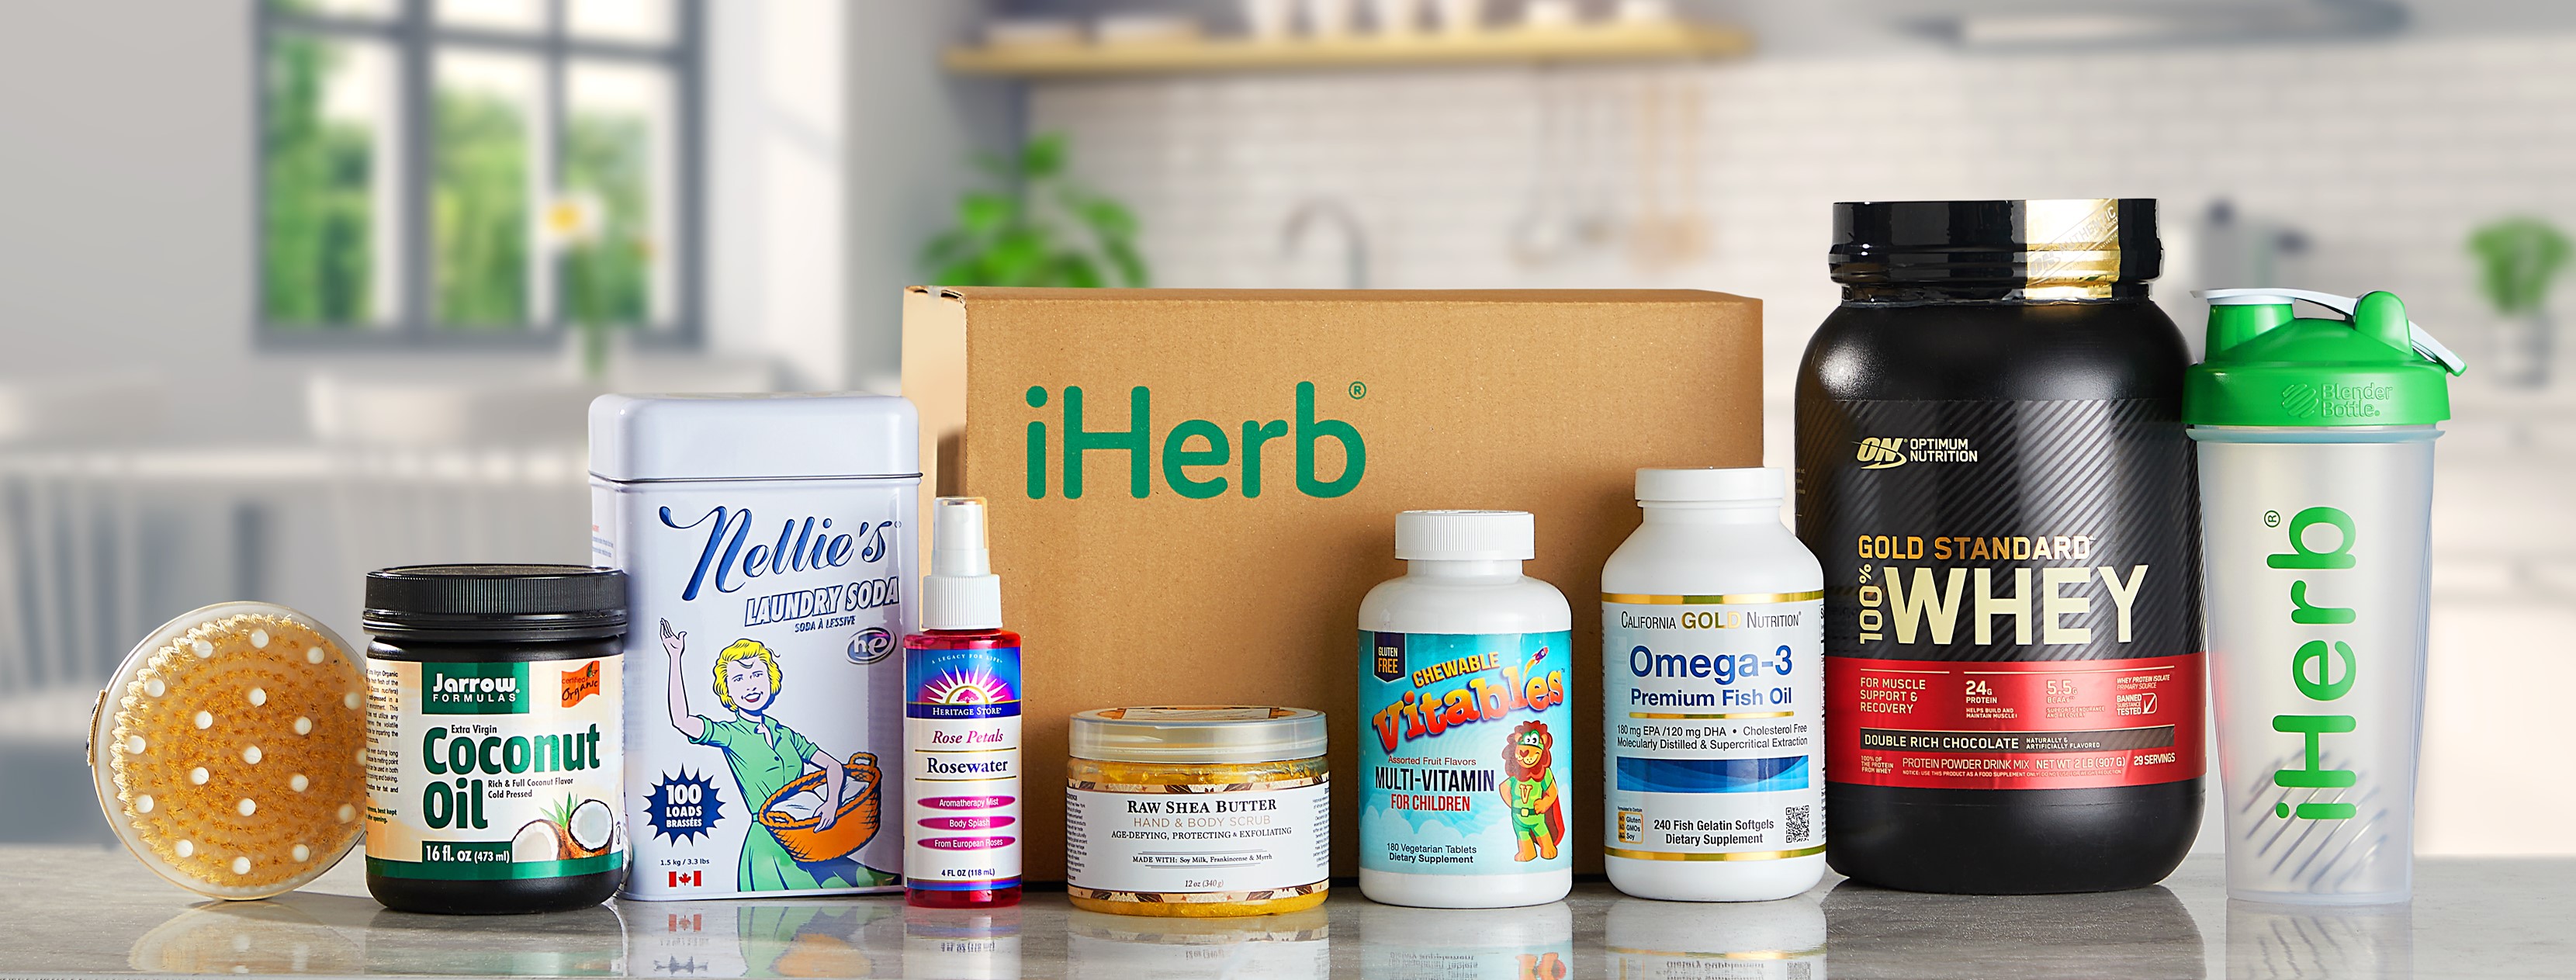 Shh, iHerb extra 22% OFF A$30 sitewde with promo code. Save on supplements, beauty & more